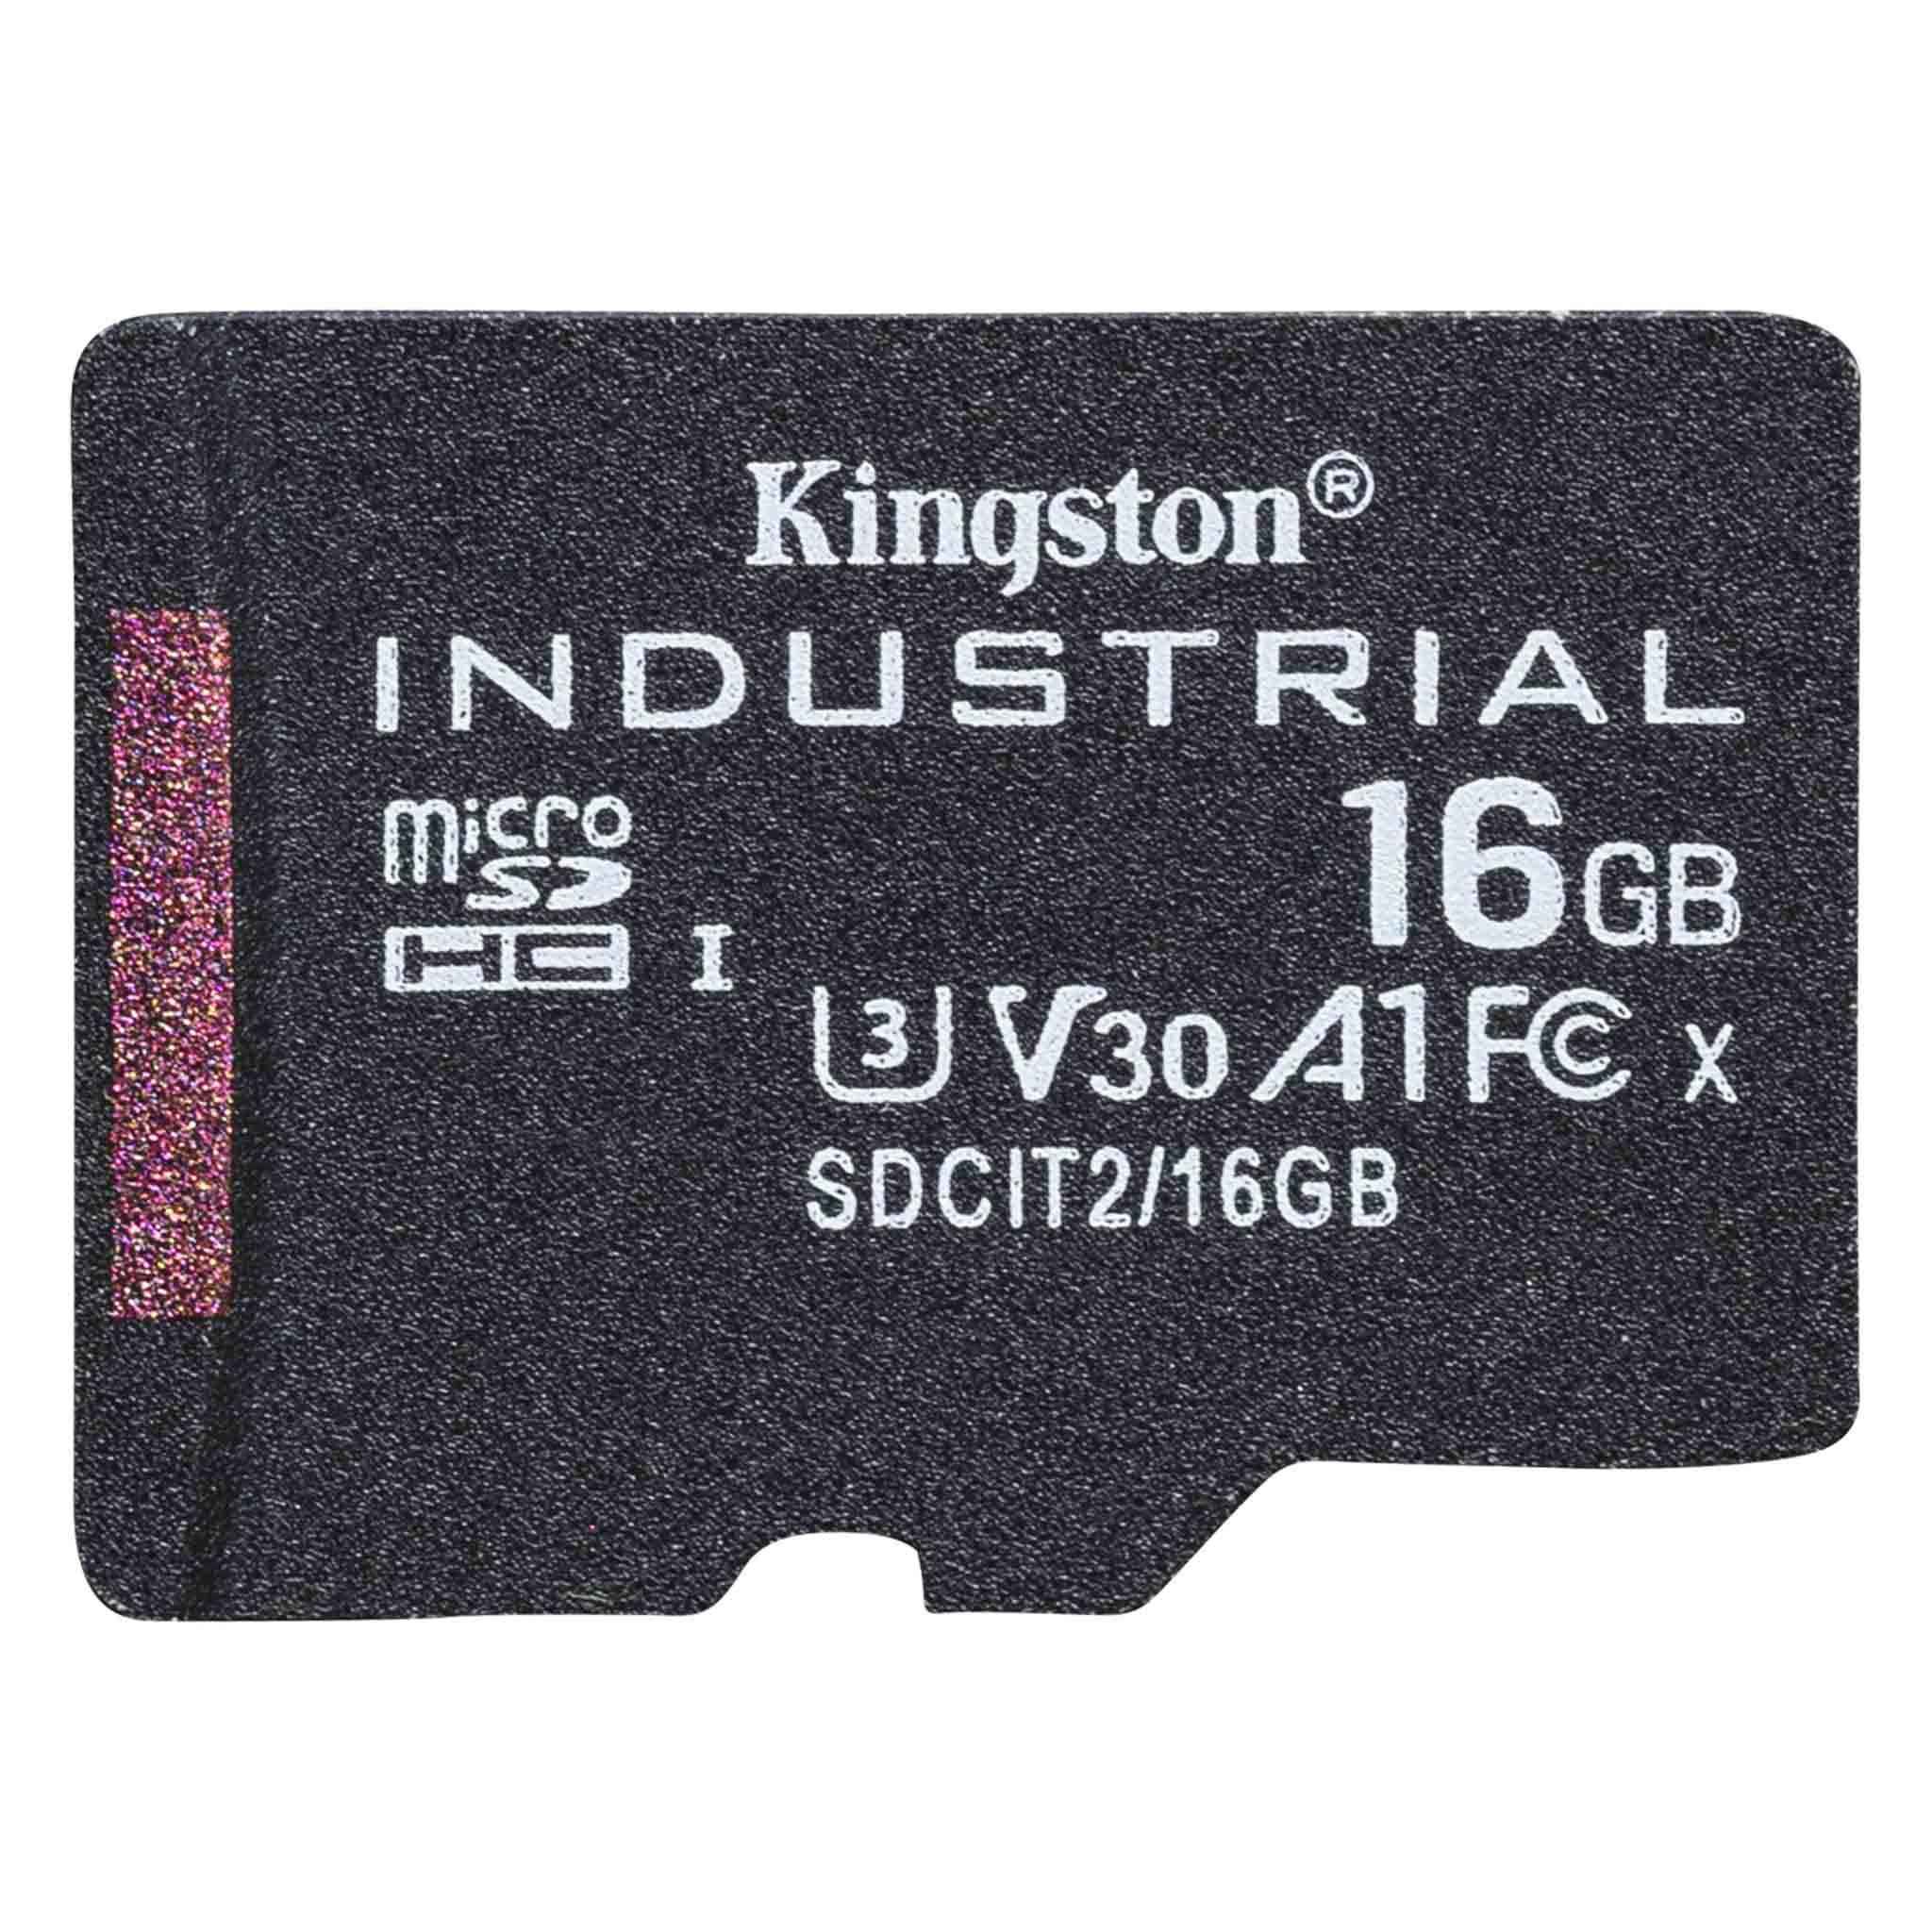 Kingston Industrial Grade 8GB Emporia TALKsmart MicroSDHC Card Verified by SanFlash. 90MBs Works for Kingston